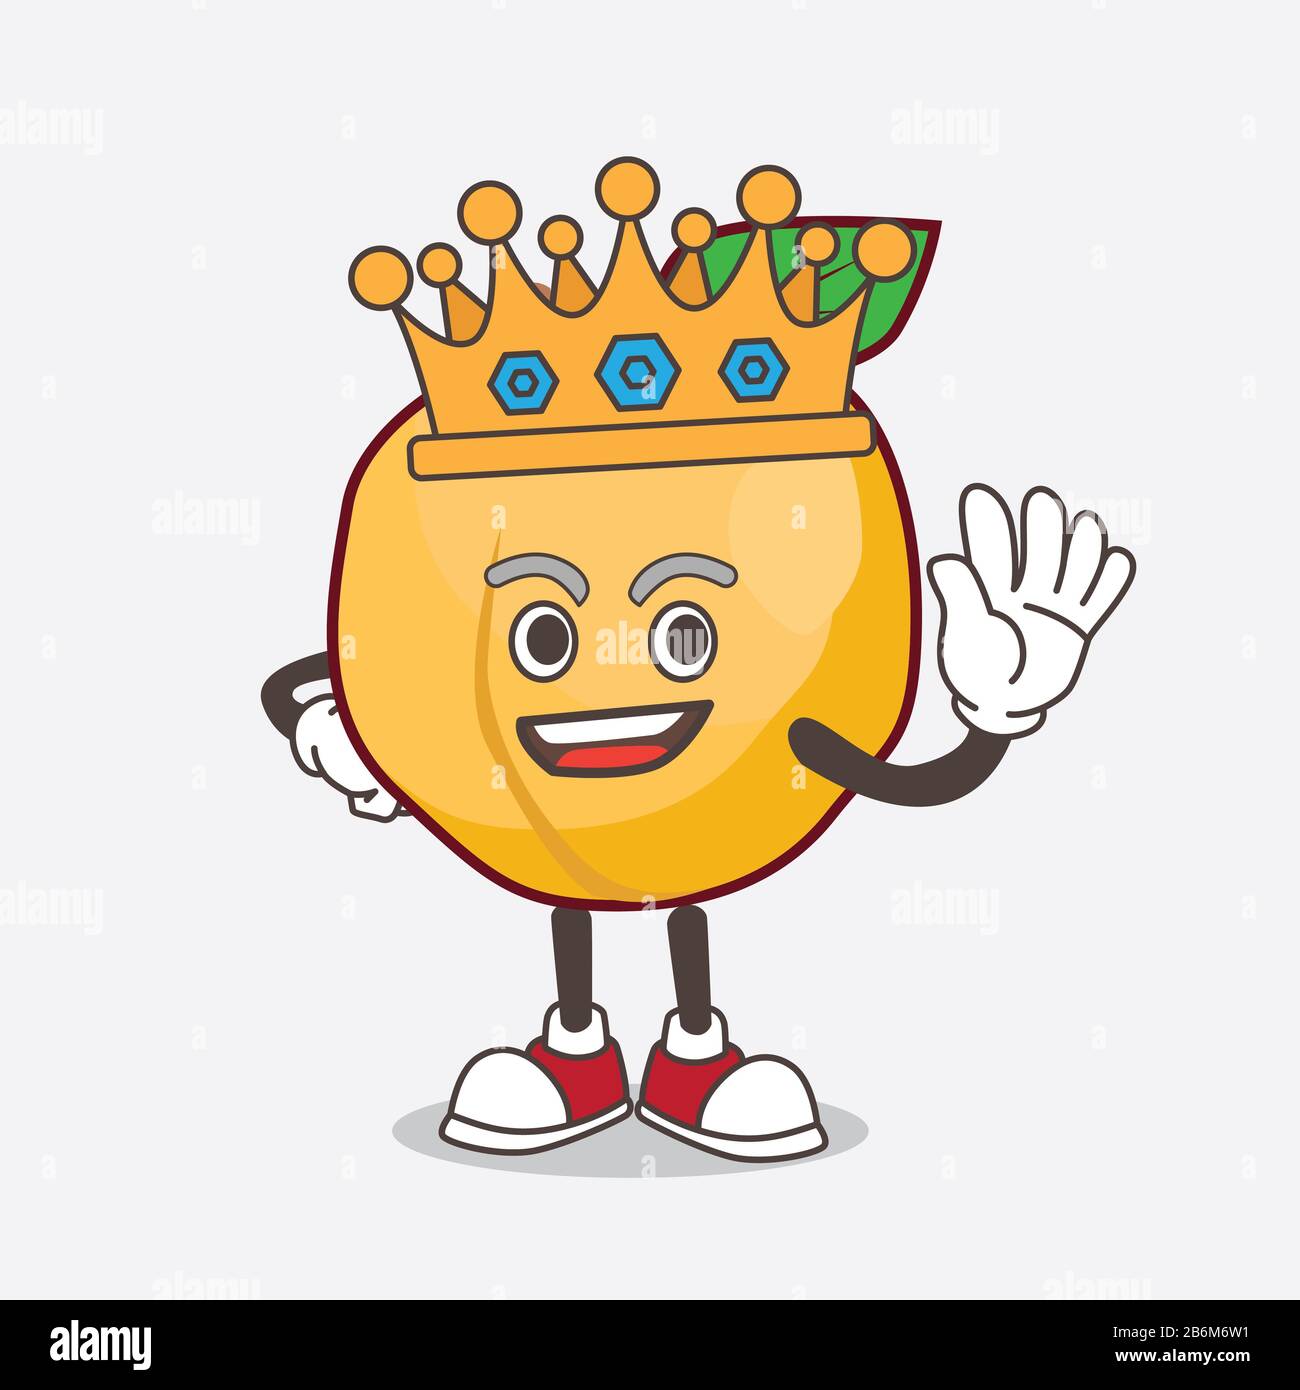 A picture of Apricot cartoon mascot character stylized of King on cartoon mascot design Stock Photo